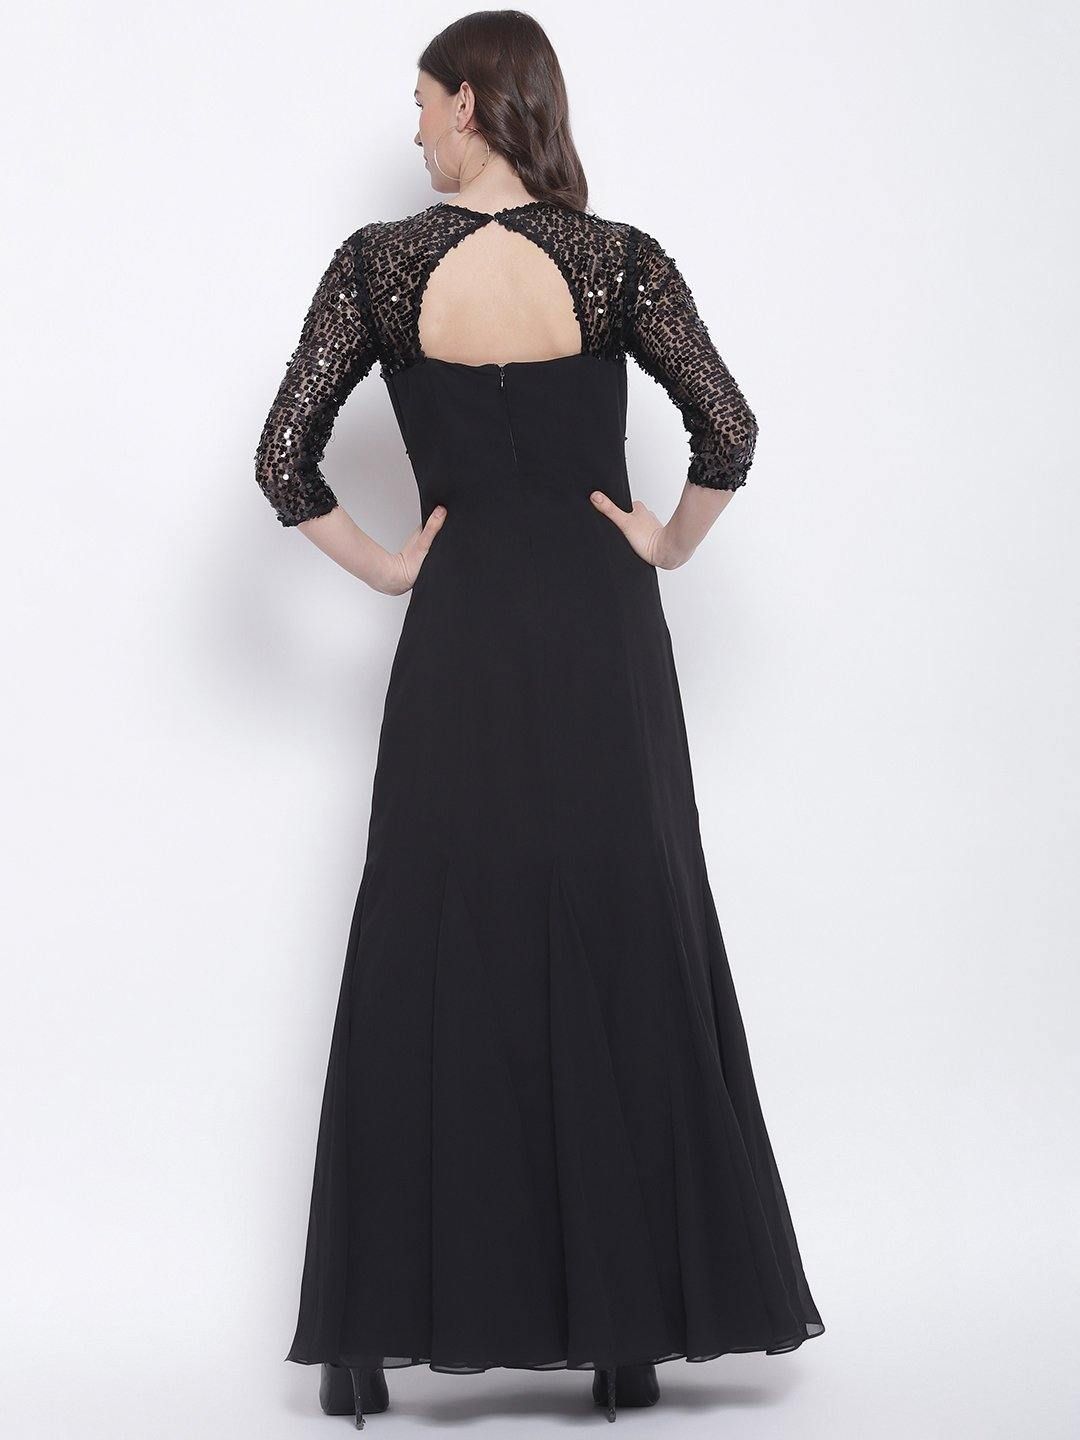 Long Sleeve Gowns - Buy Maxi Dress with Long Sleeves Online at Myntra